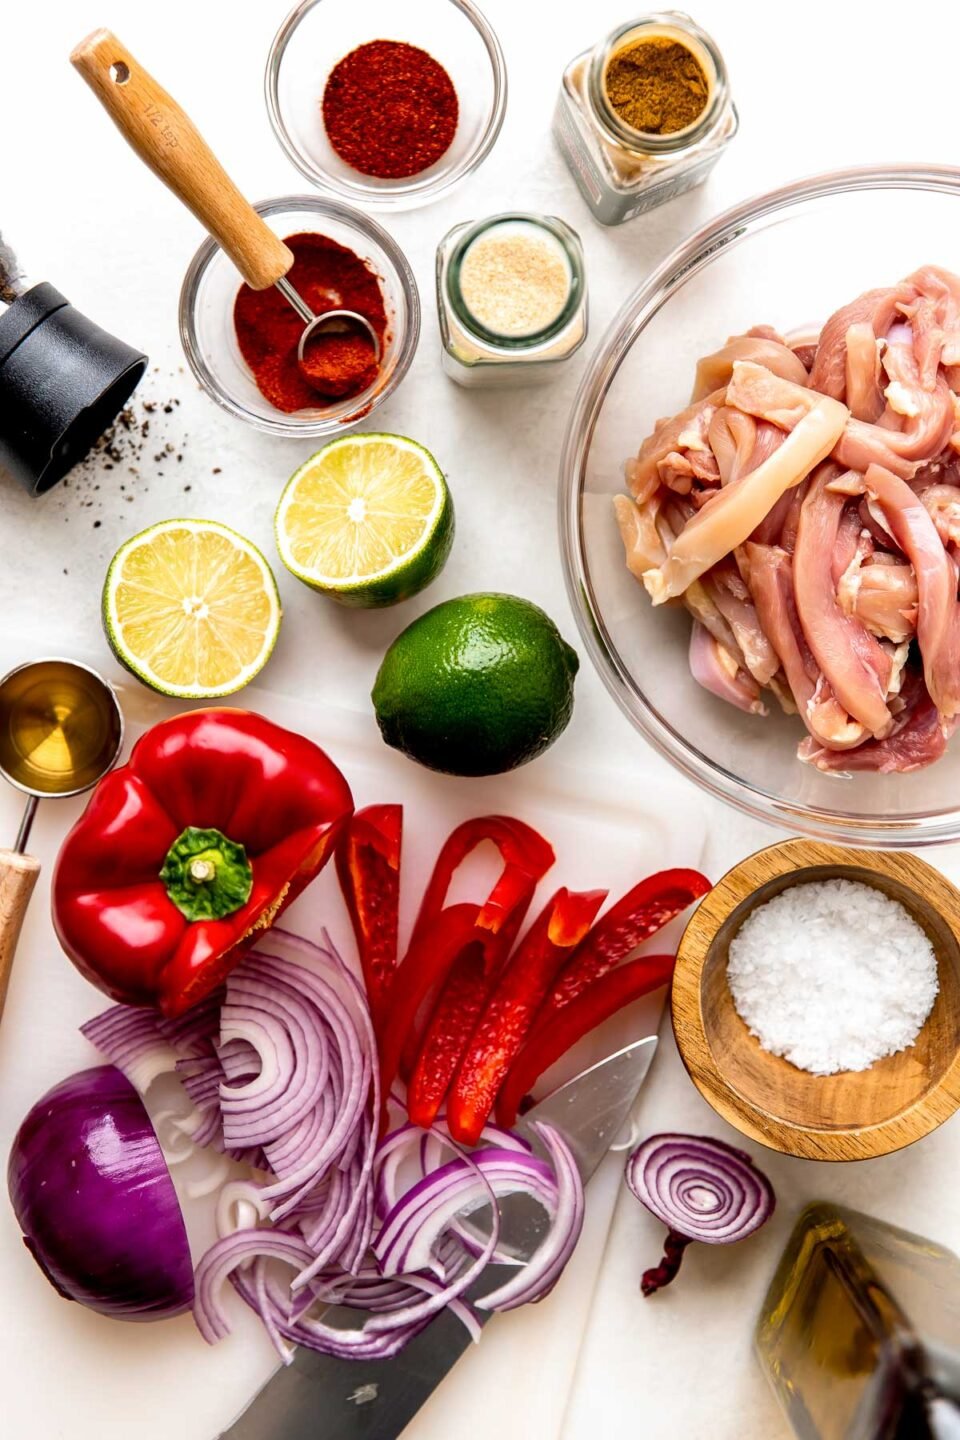 Ingredients are displayed on a white surface: sliced red onion, red pepper, halved lime, jars and bowls of spices, sliced chicken, agave and salt and pepper.